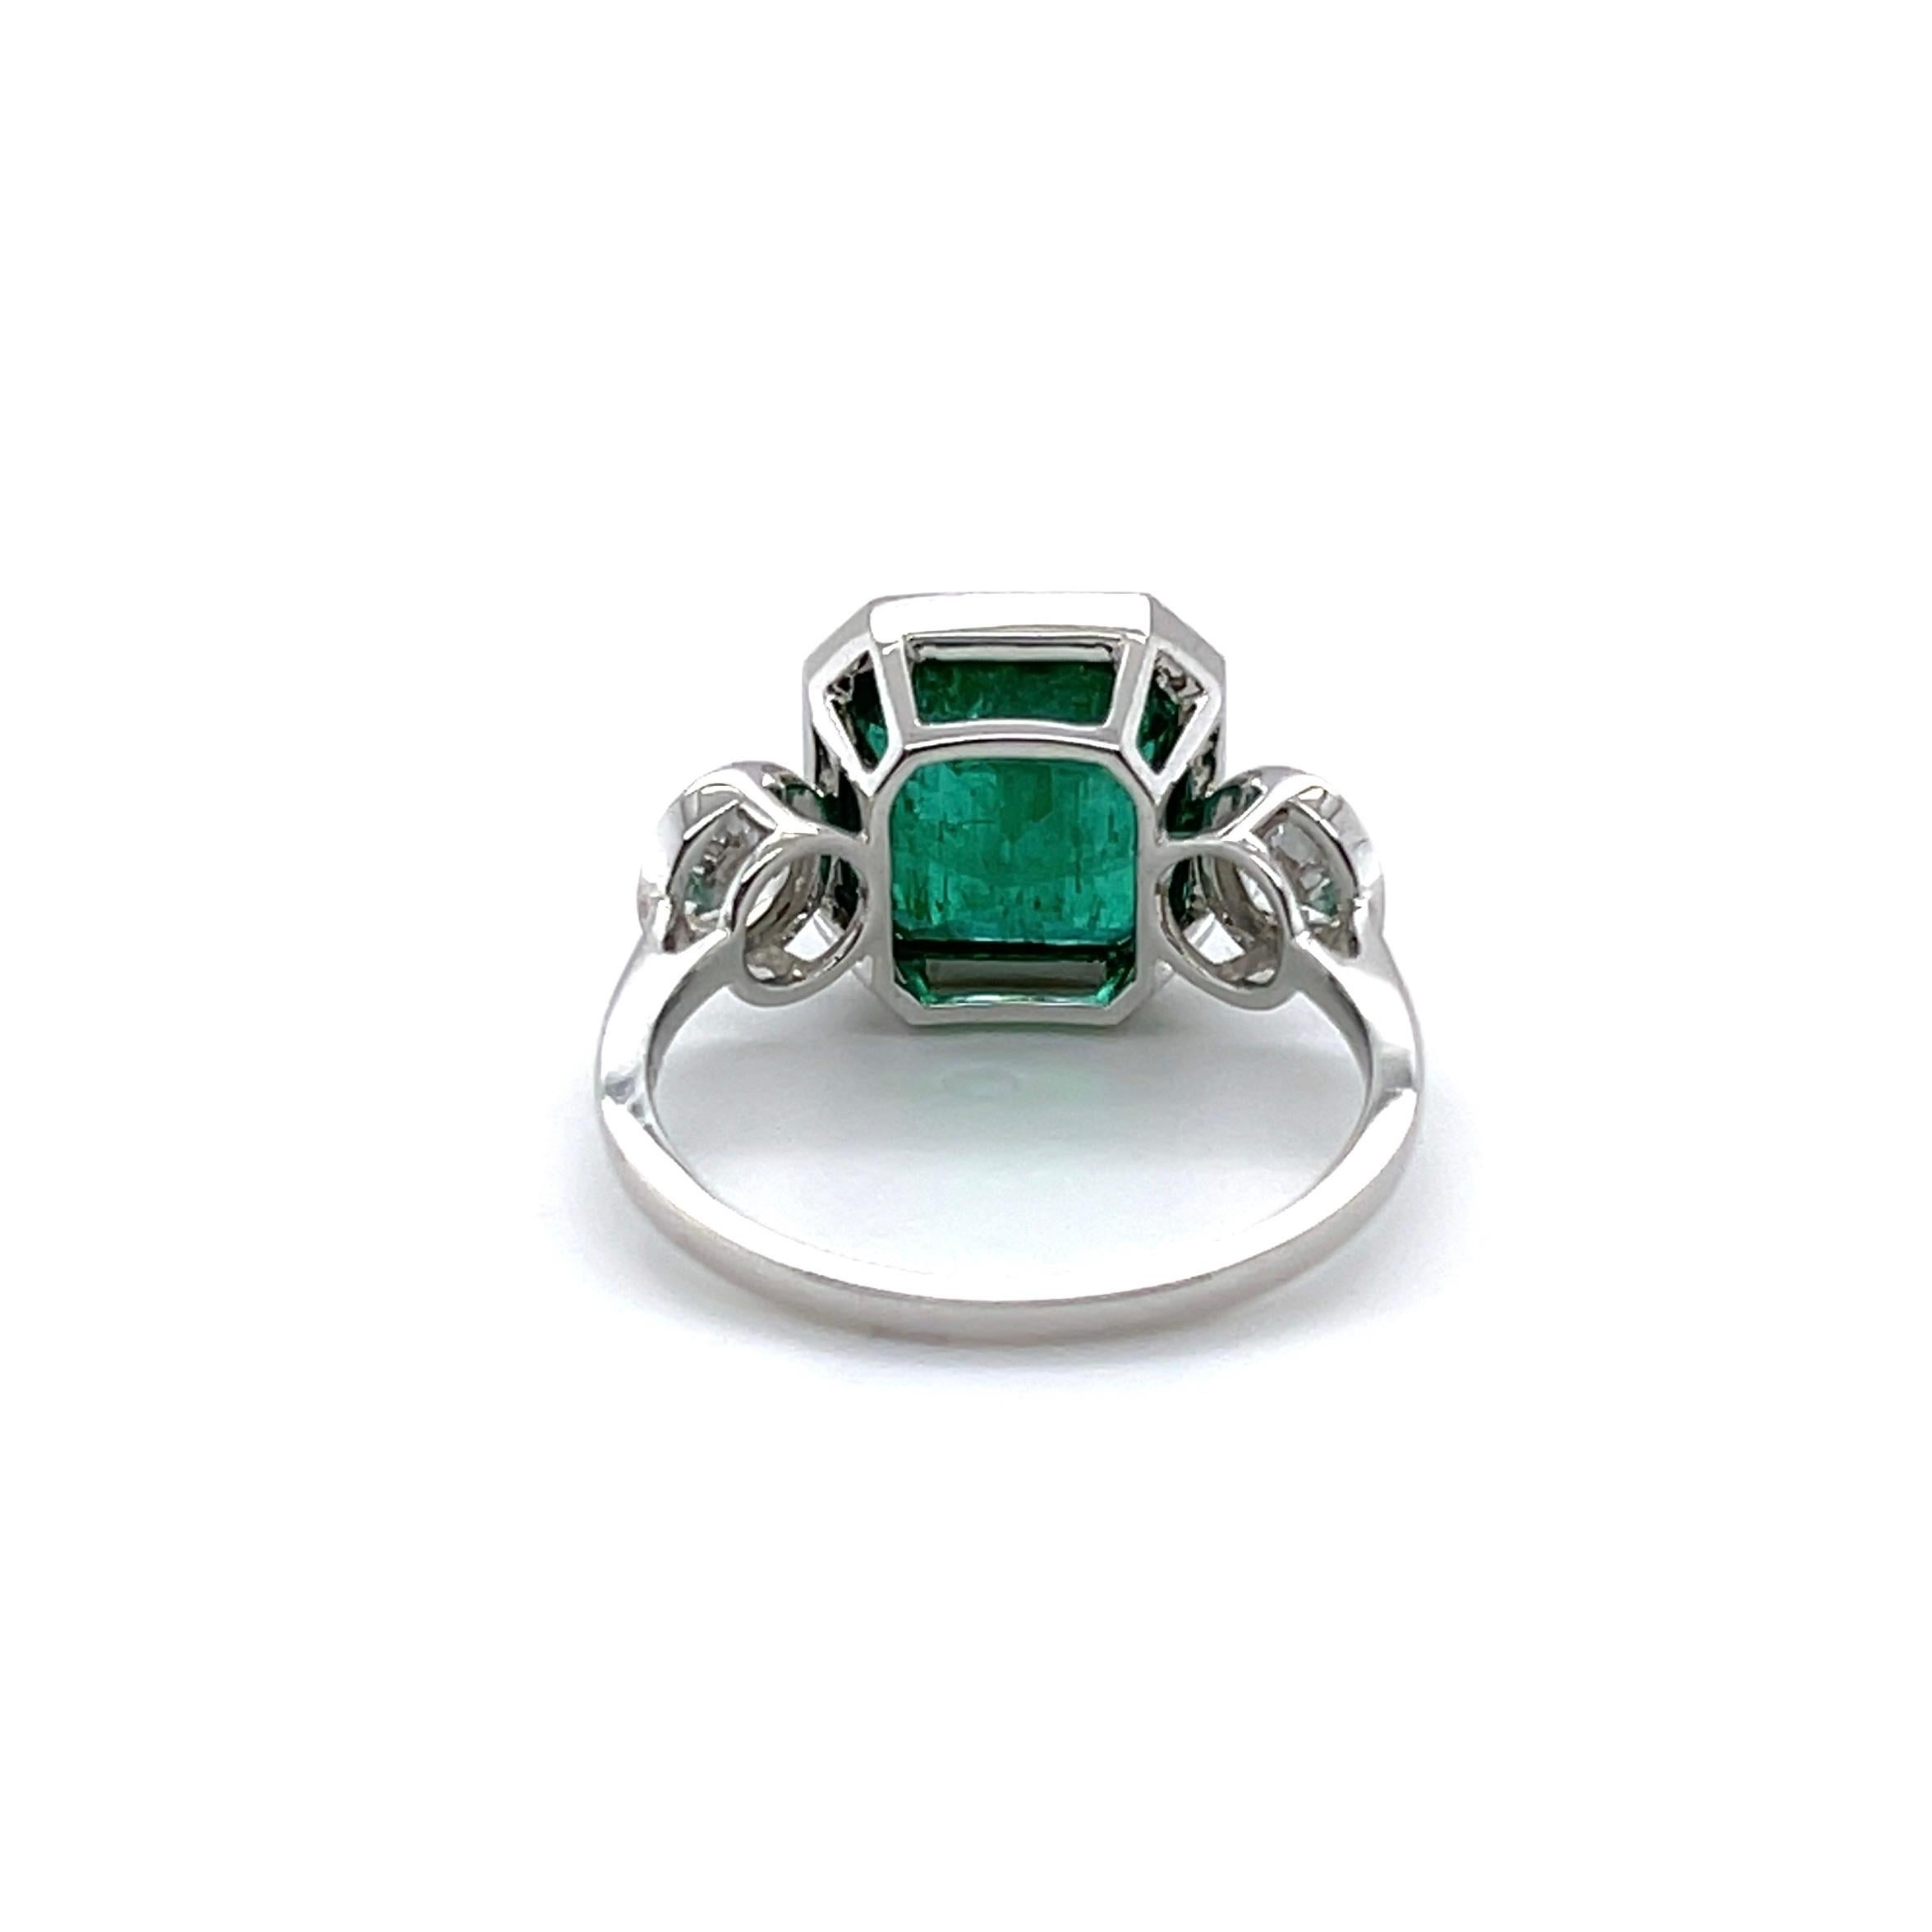 For Sale:  Imperial Jewels 18ct White Gold 3.85ct Emerald and Diamond Ring 4